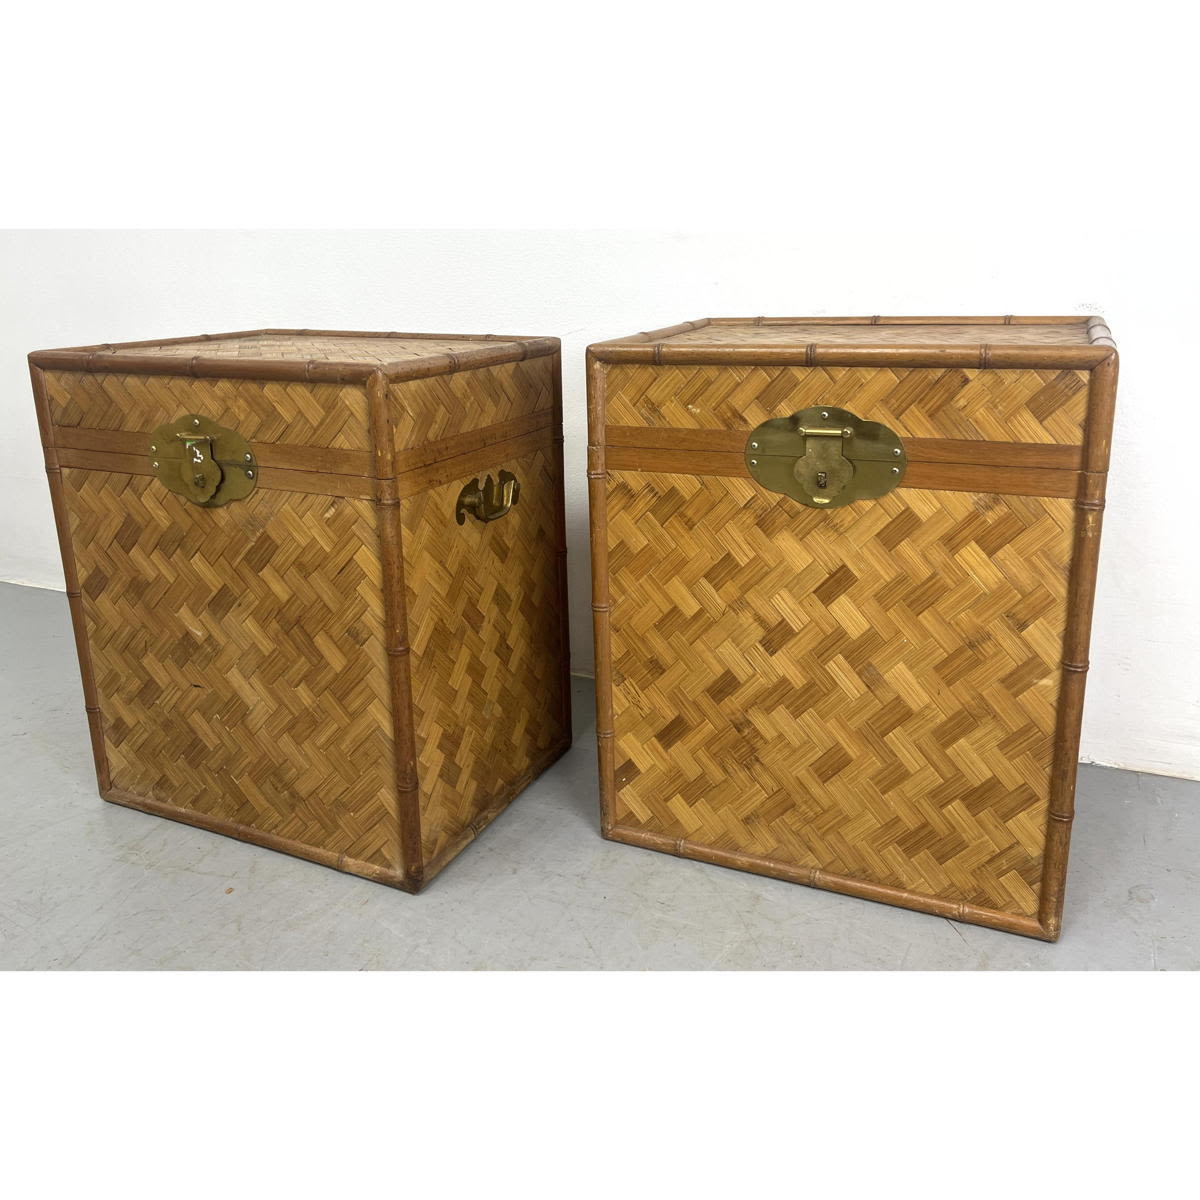 Pair of Bamboo Campaign Style Hinged